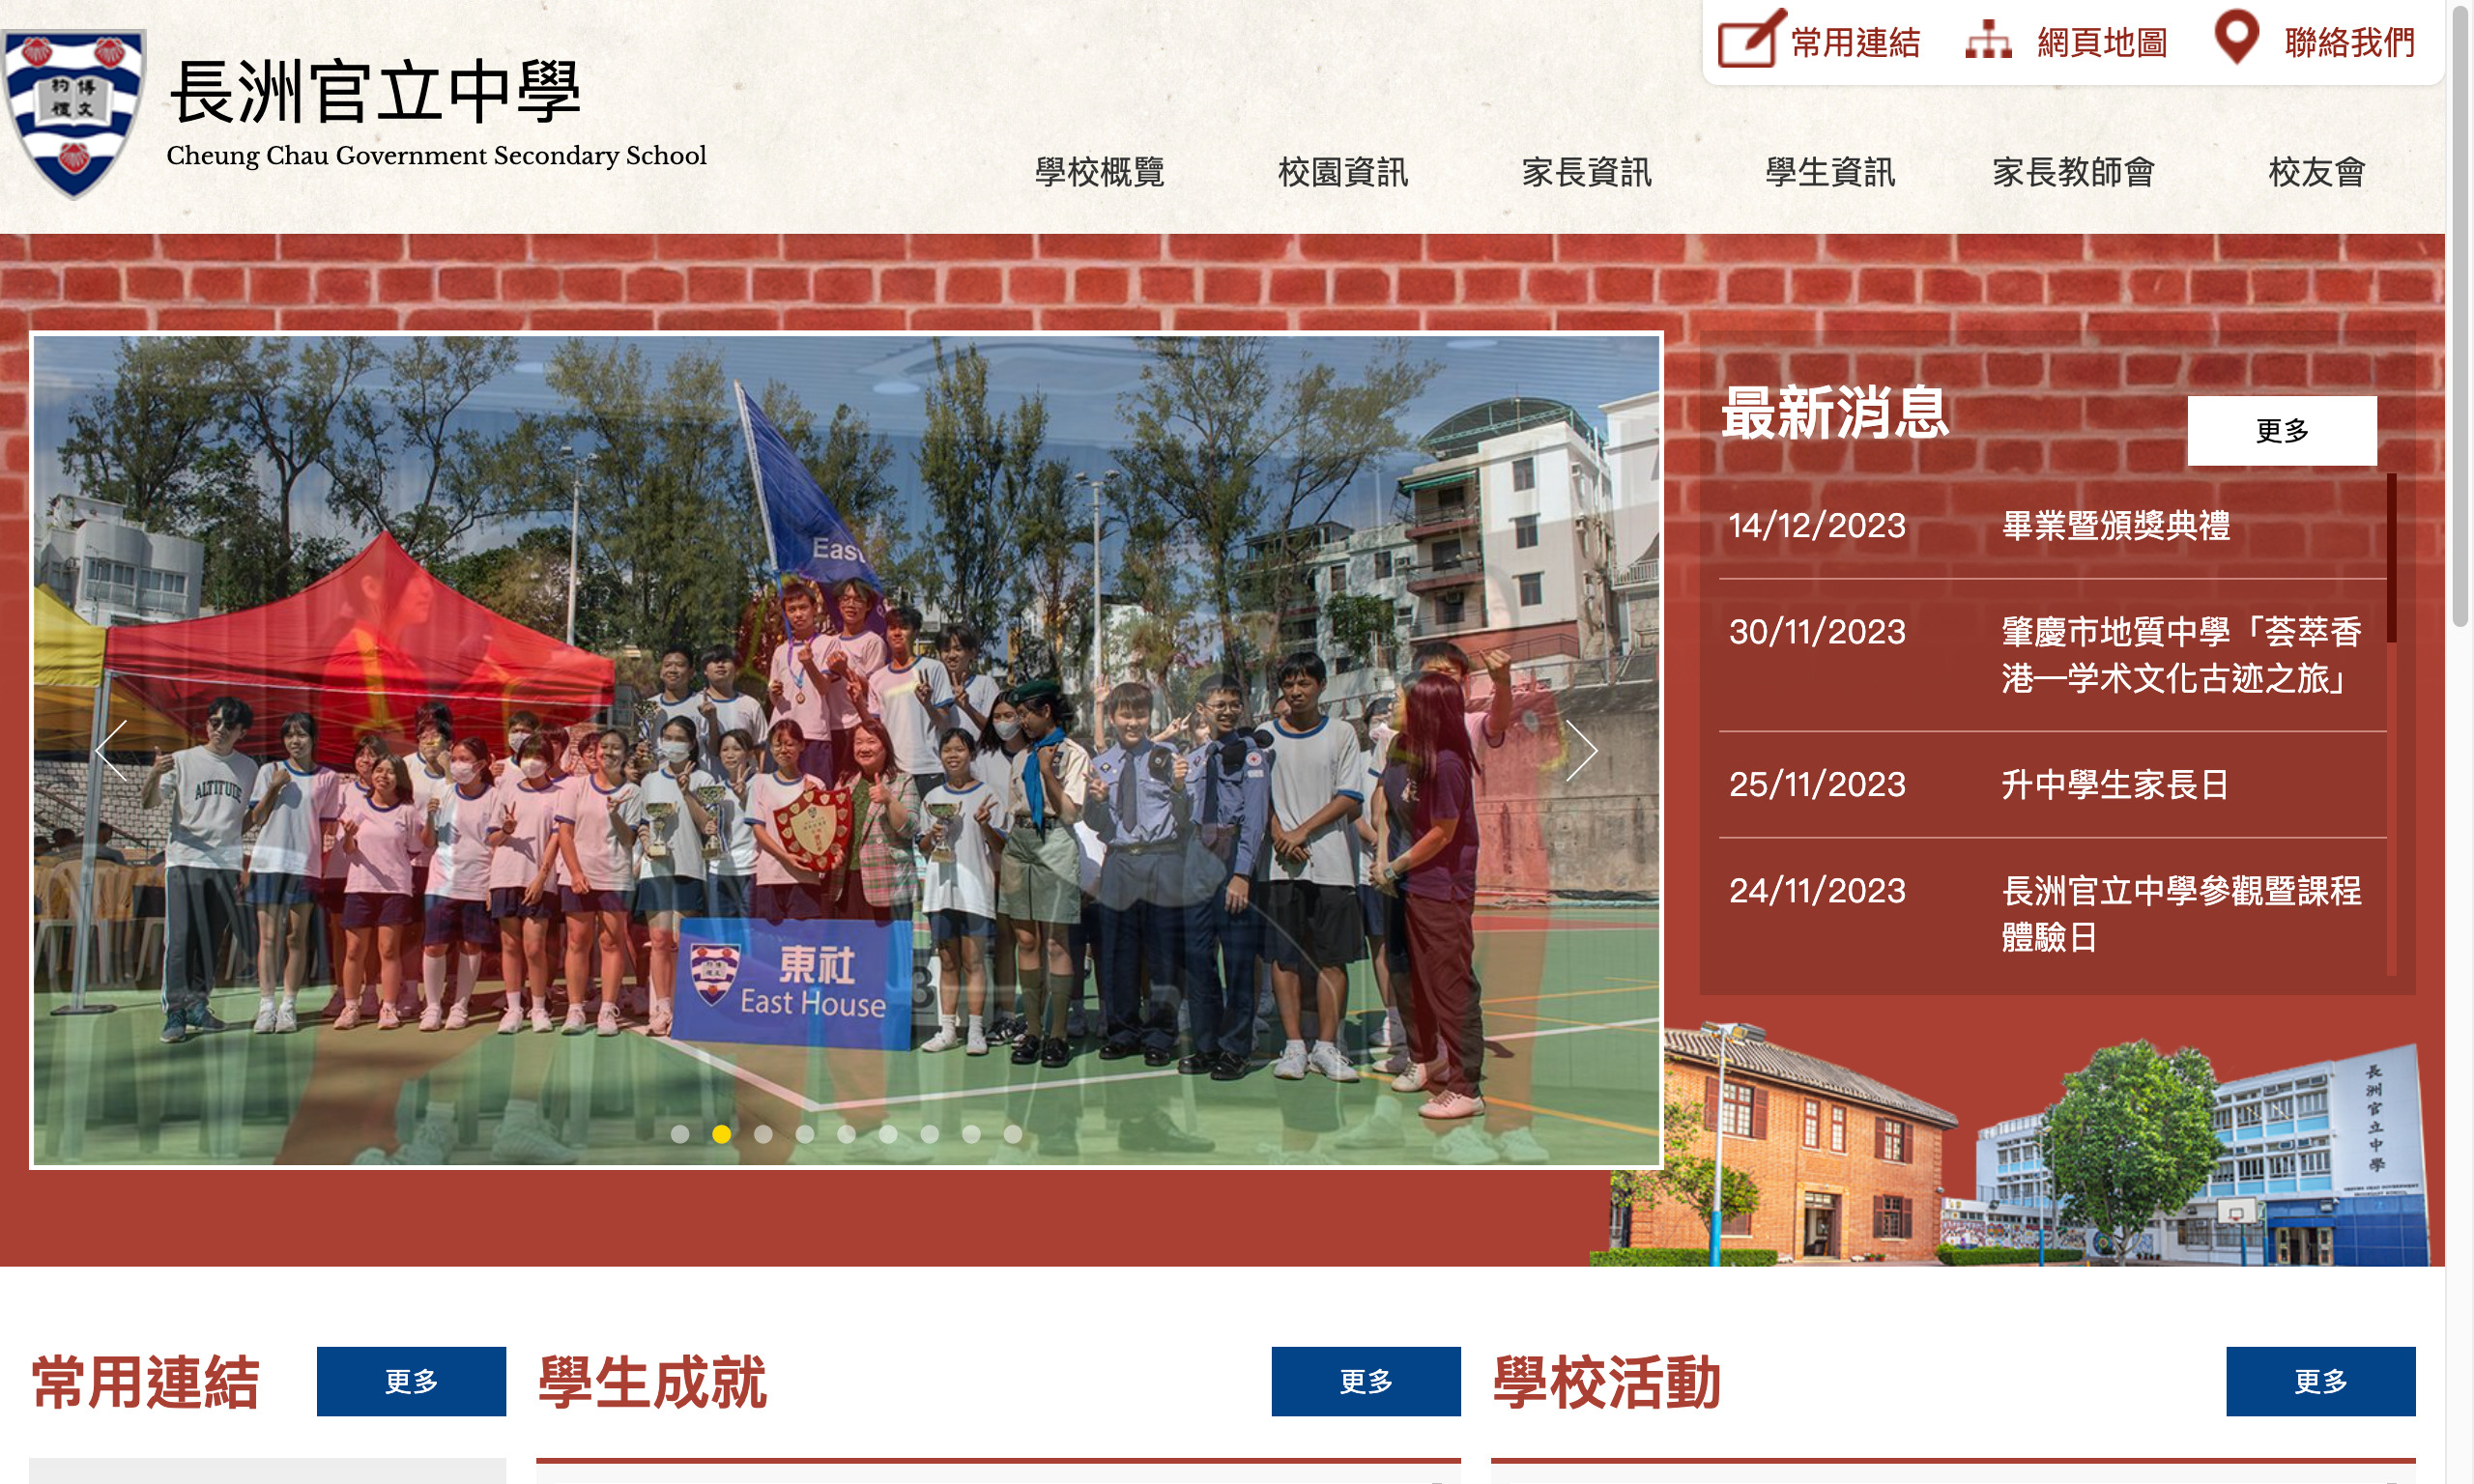 Screenshot of the Home Page of Cheung Chau Government Secondary School